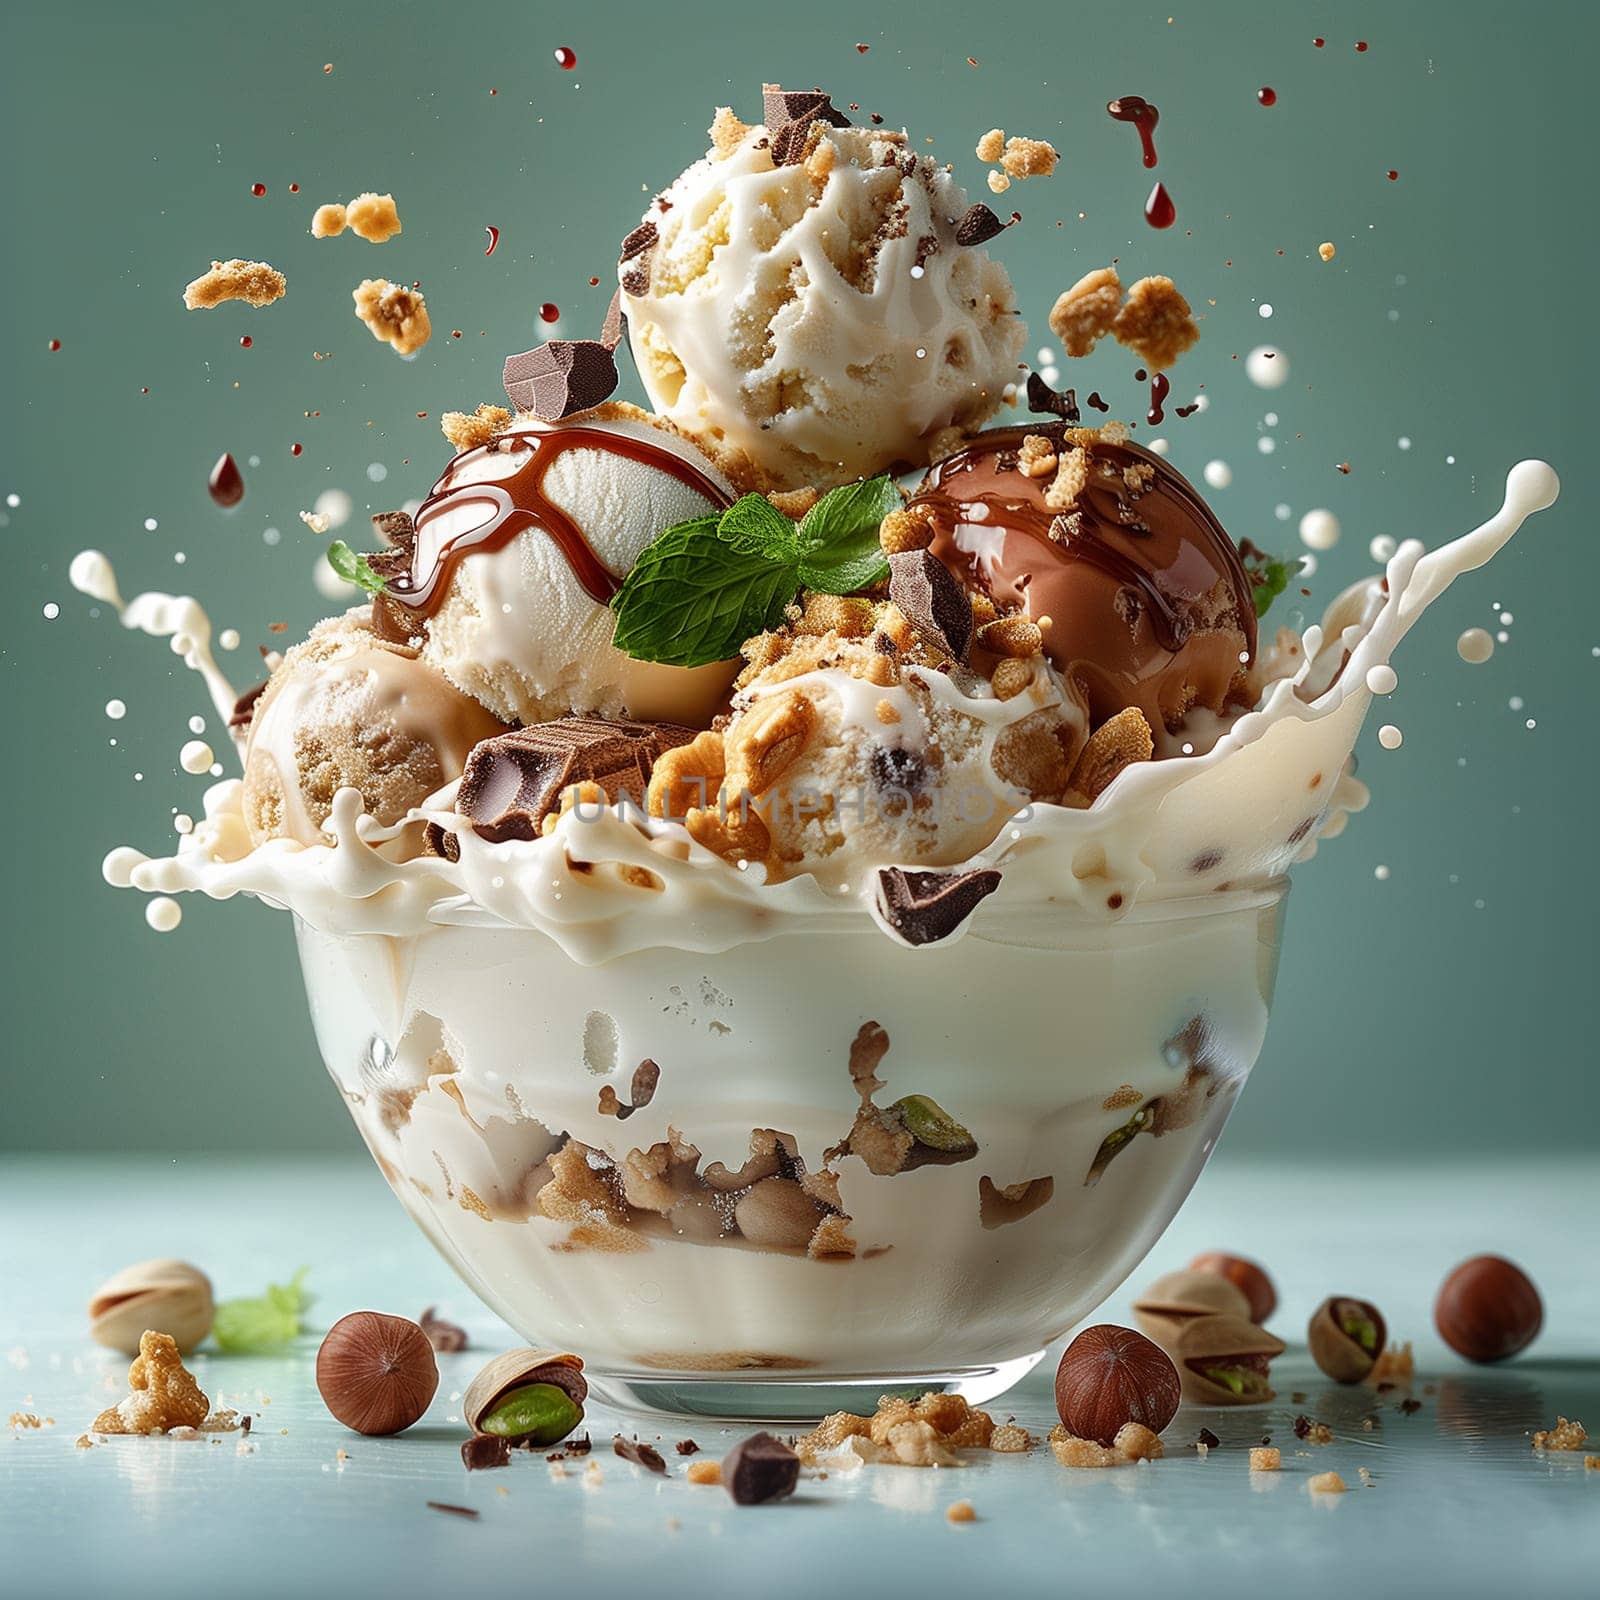 A bowl filled with creamy ice cream topped with crunchy nuts, ready to be enjoyed.